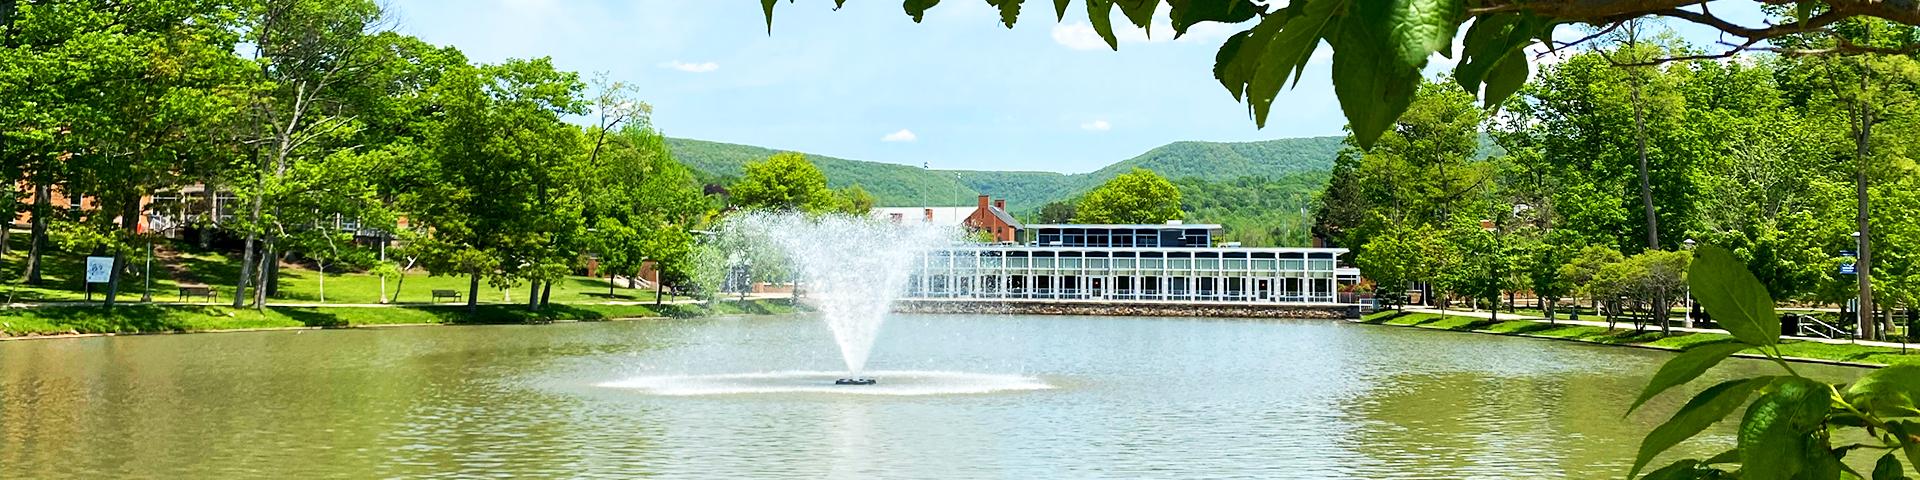 The Slep Student Center overlooking the Reflecting Pond and fountain